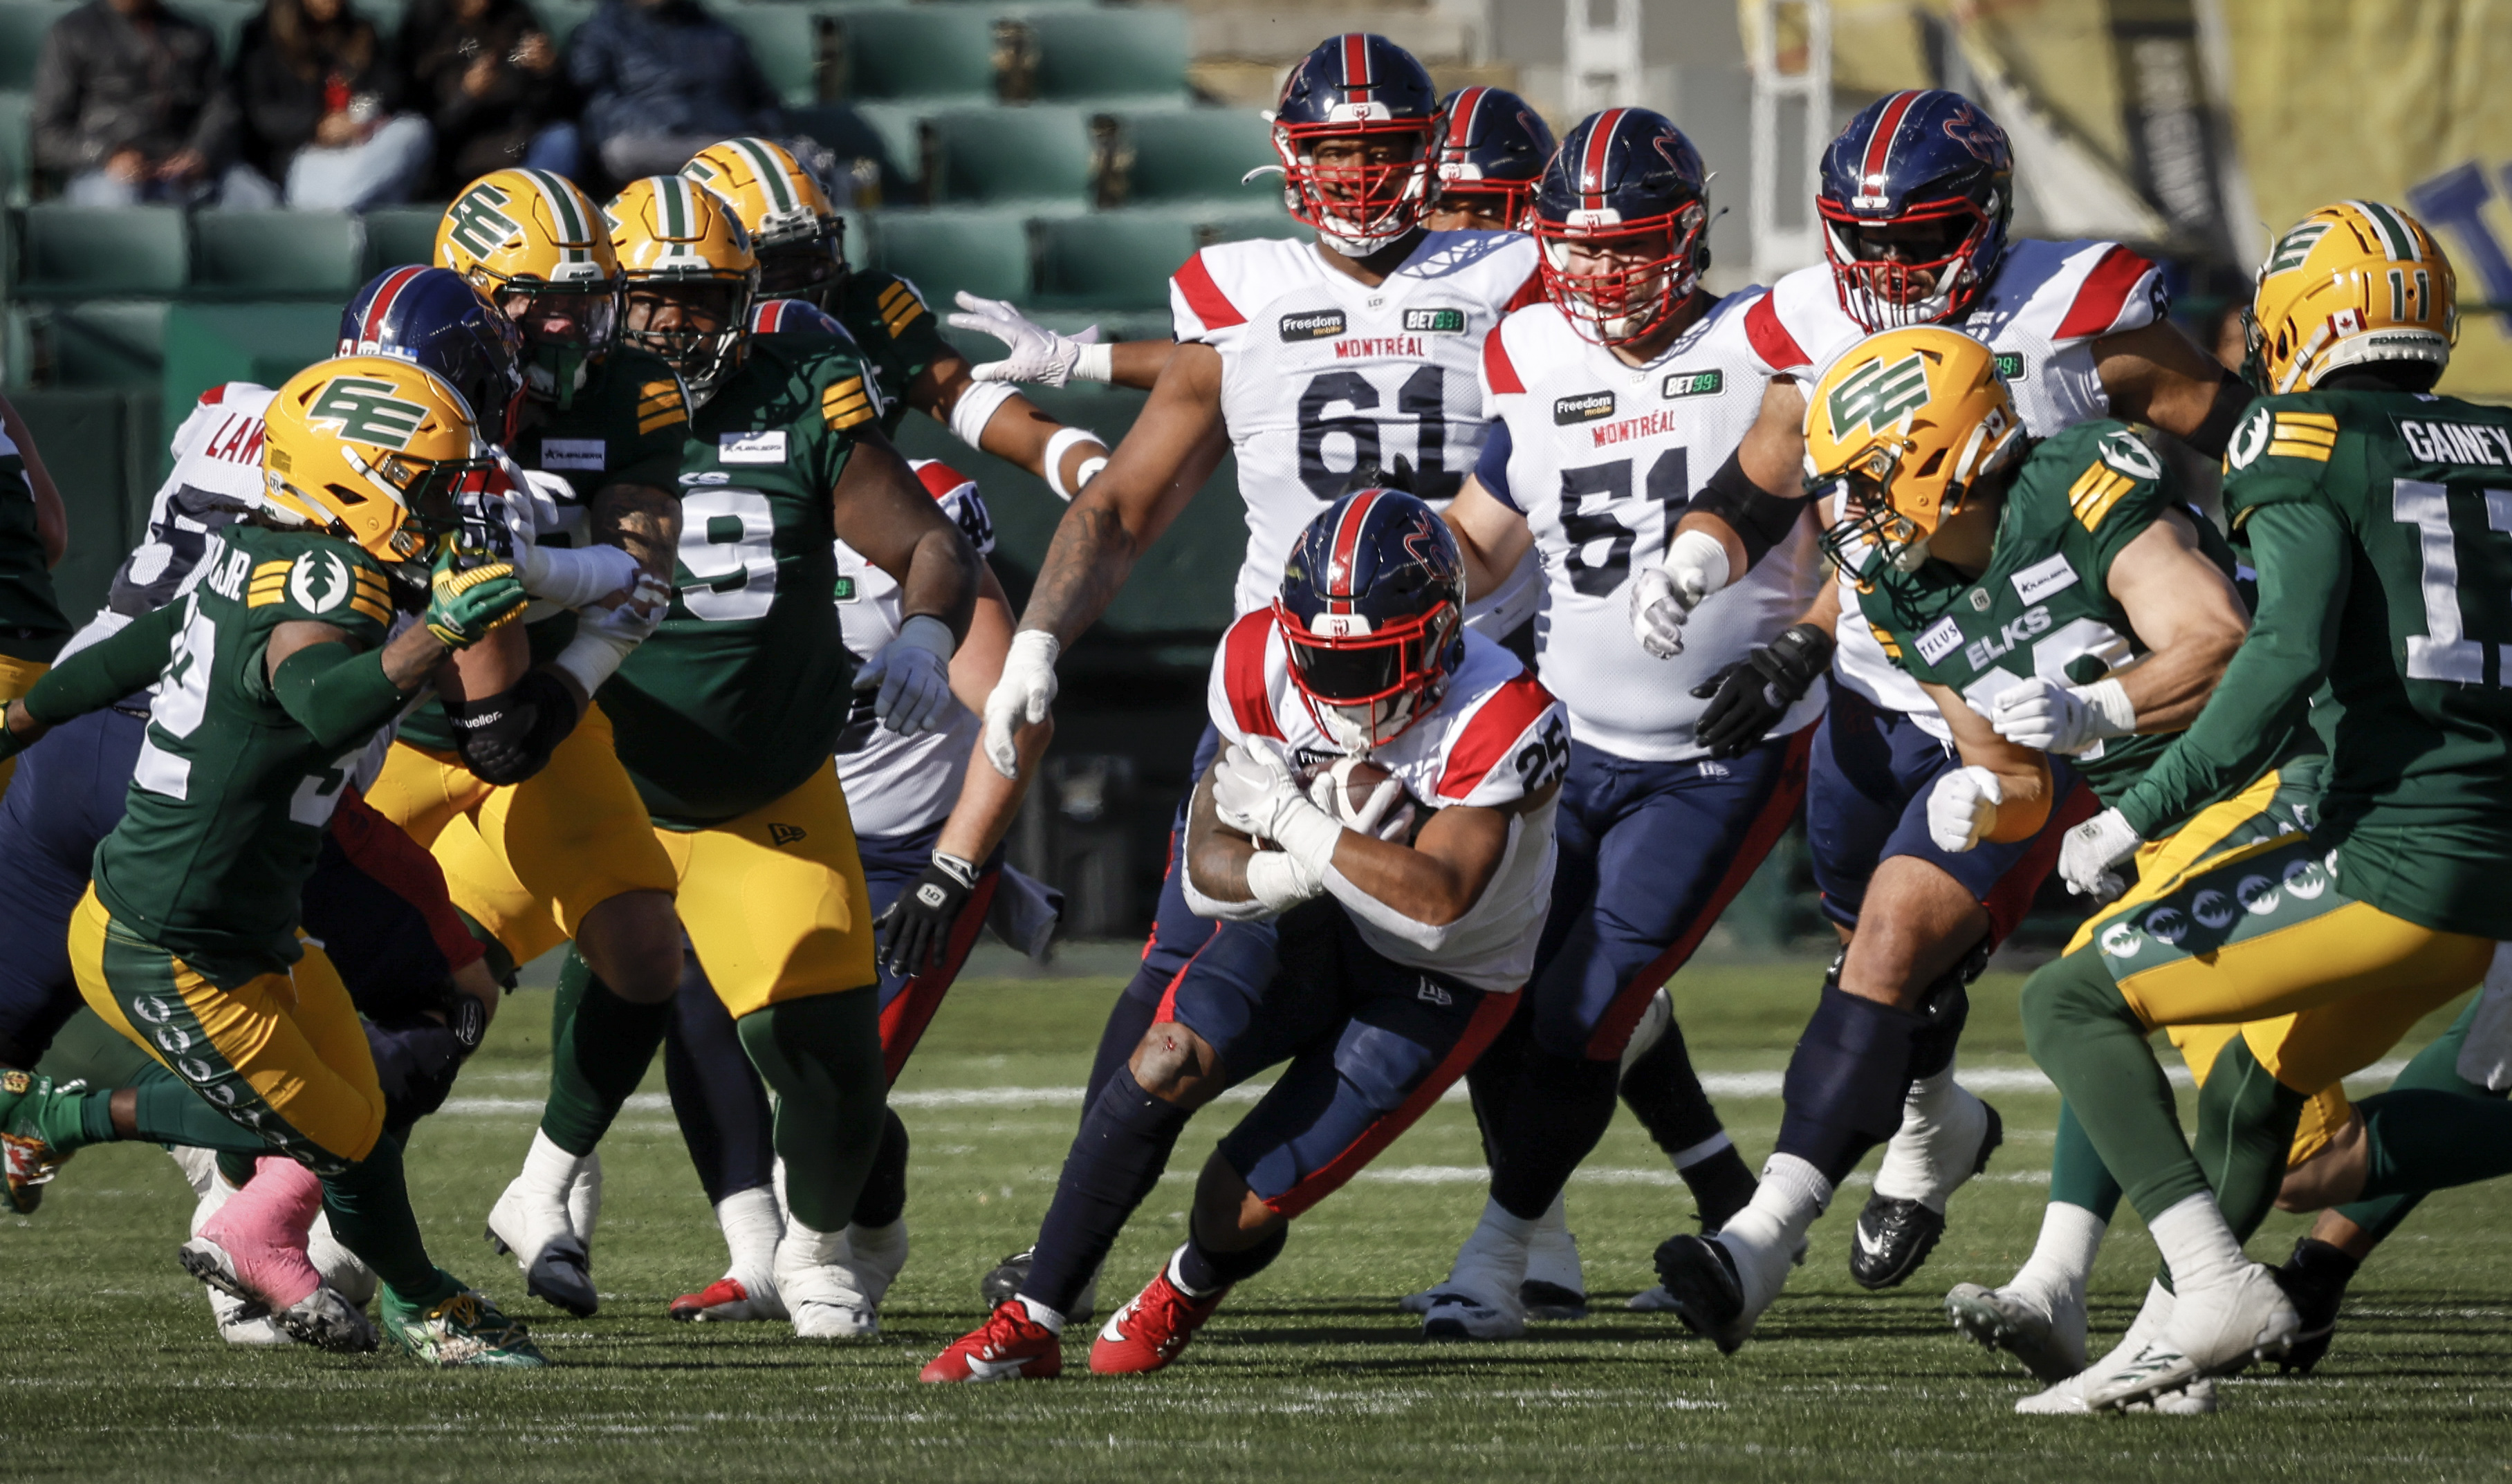 Letcher ignites Alouettes comeback as Elks fall 35-21 at home